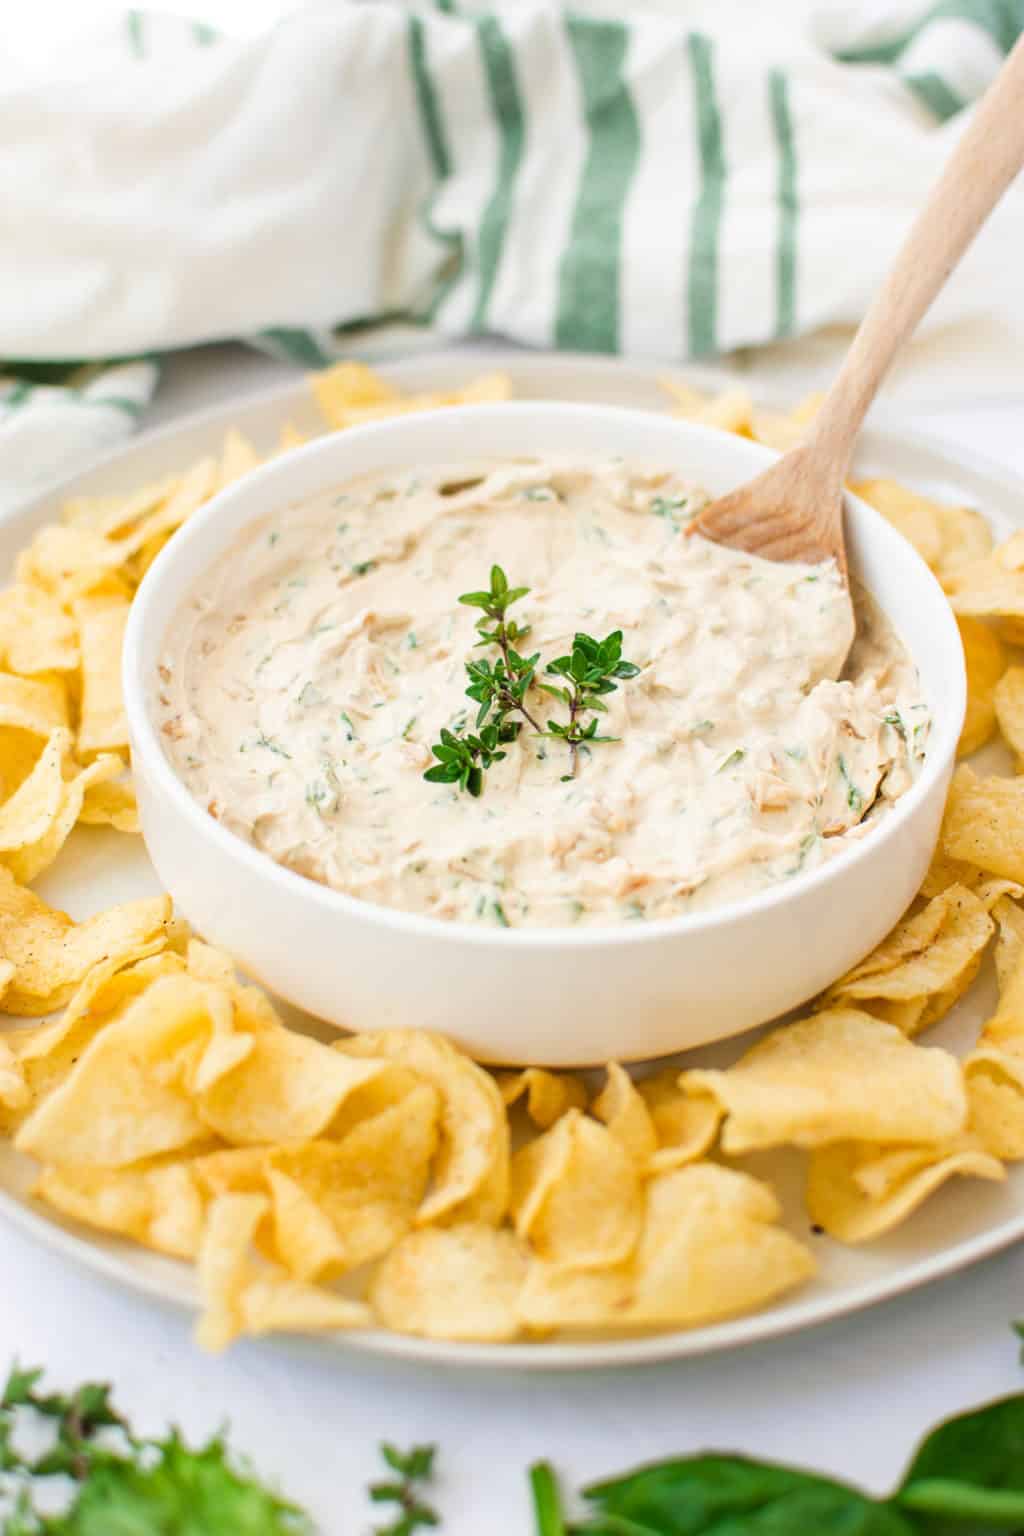 High in protein, gluten free, and only 2 ingredients, this Easy + Healthy French Onion Dip is the perfect appetizer. || The Butter Half #appetizerrecipes #easyappetizer #frenchoniondip